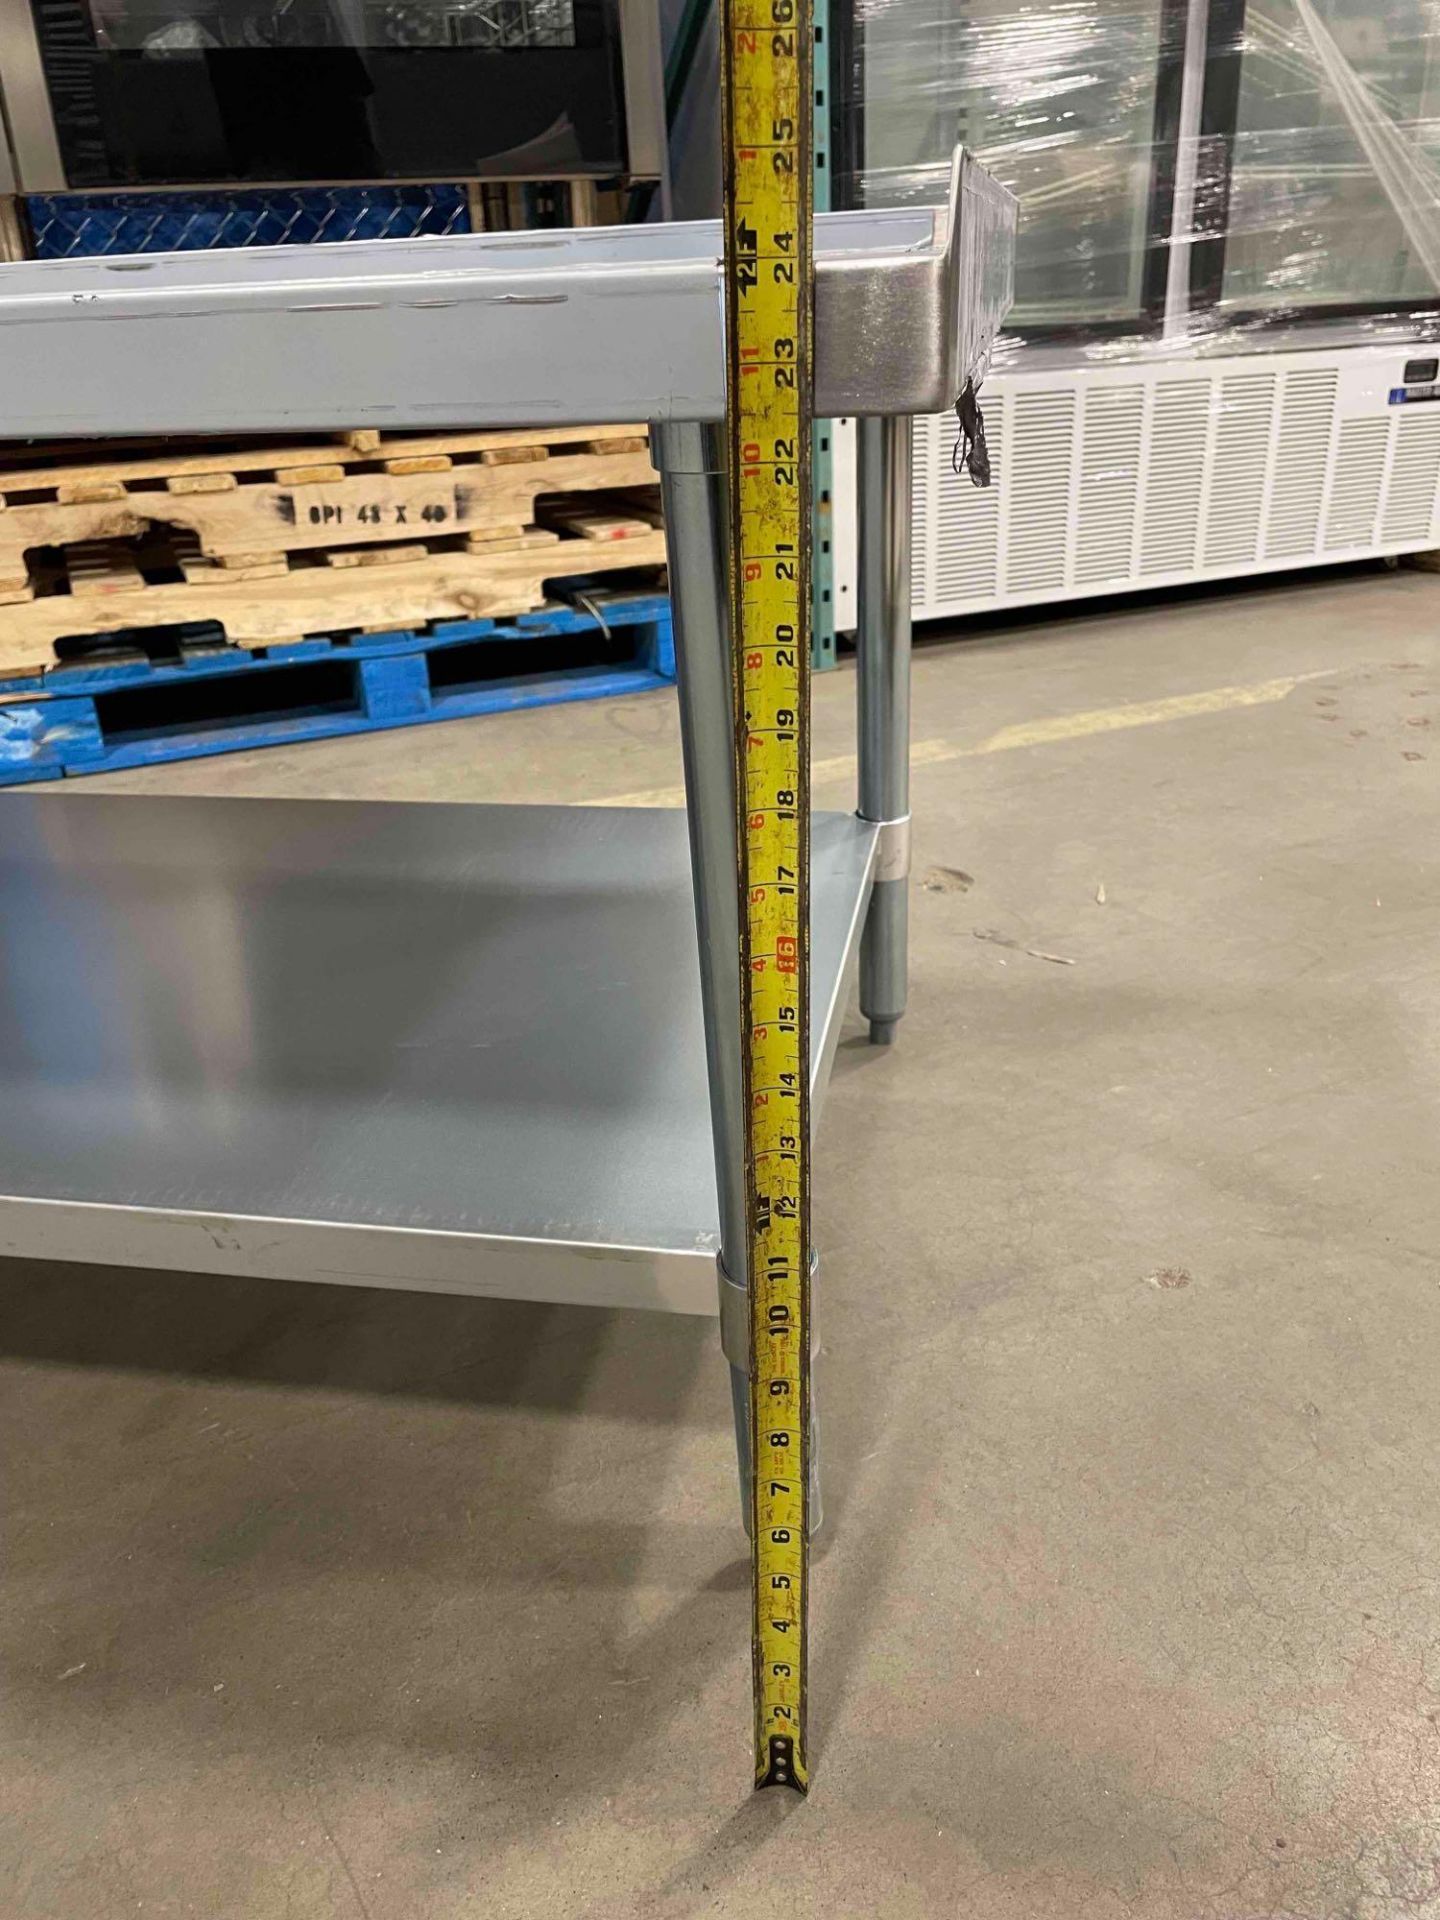 NEW 30" X 72" STAINLESS STEEL EQUIPMENT STAND WITH UNDERSHELF - Image 6 of 7